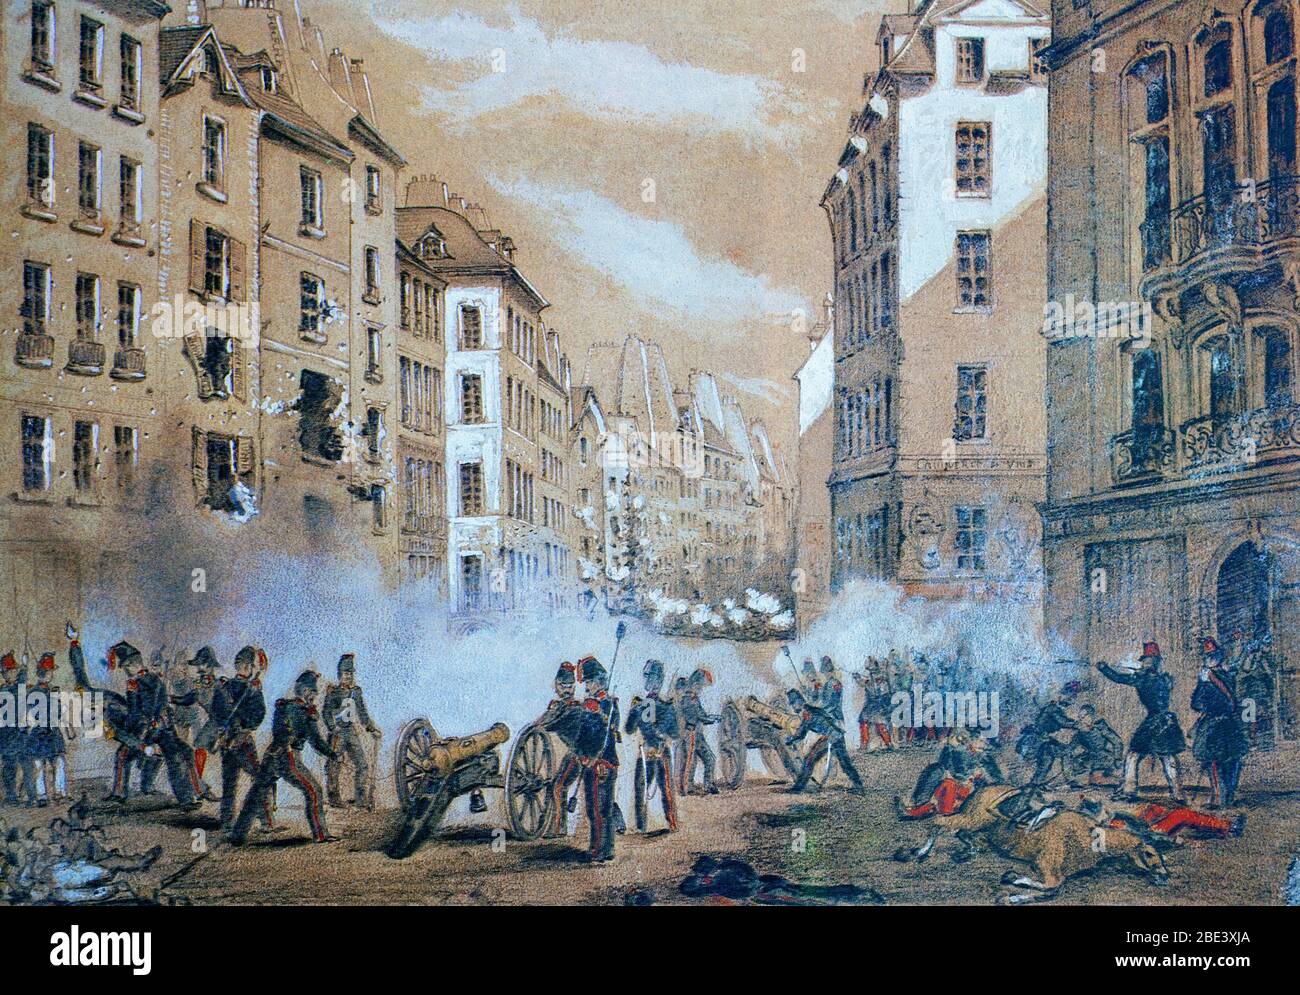 The army attacks a barricade in Rue St Antoine on 23 June 1848, when the people of Paris rose in insurrection, which became known as June Days uprising – a bloody but unsuccessful rebellion by the Paris workers against a conservative turn in the Republic's course. Stock Photo